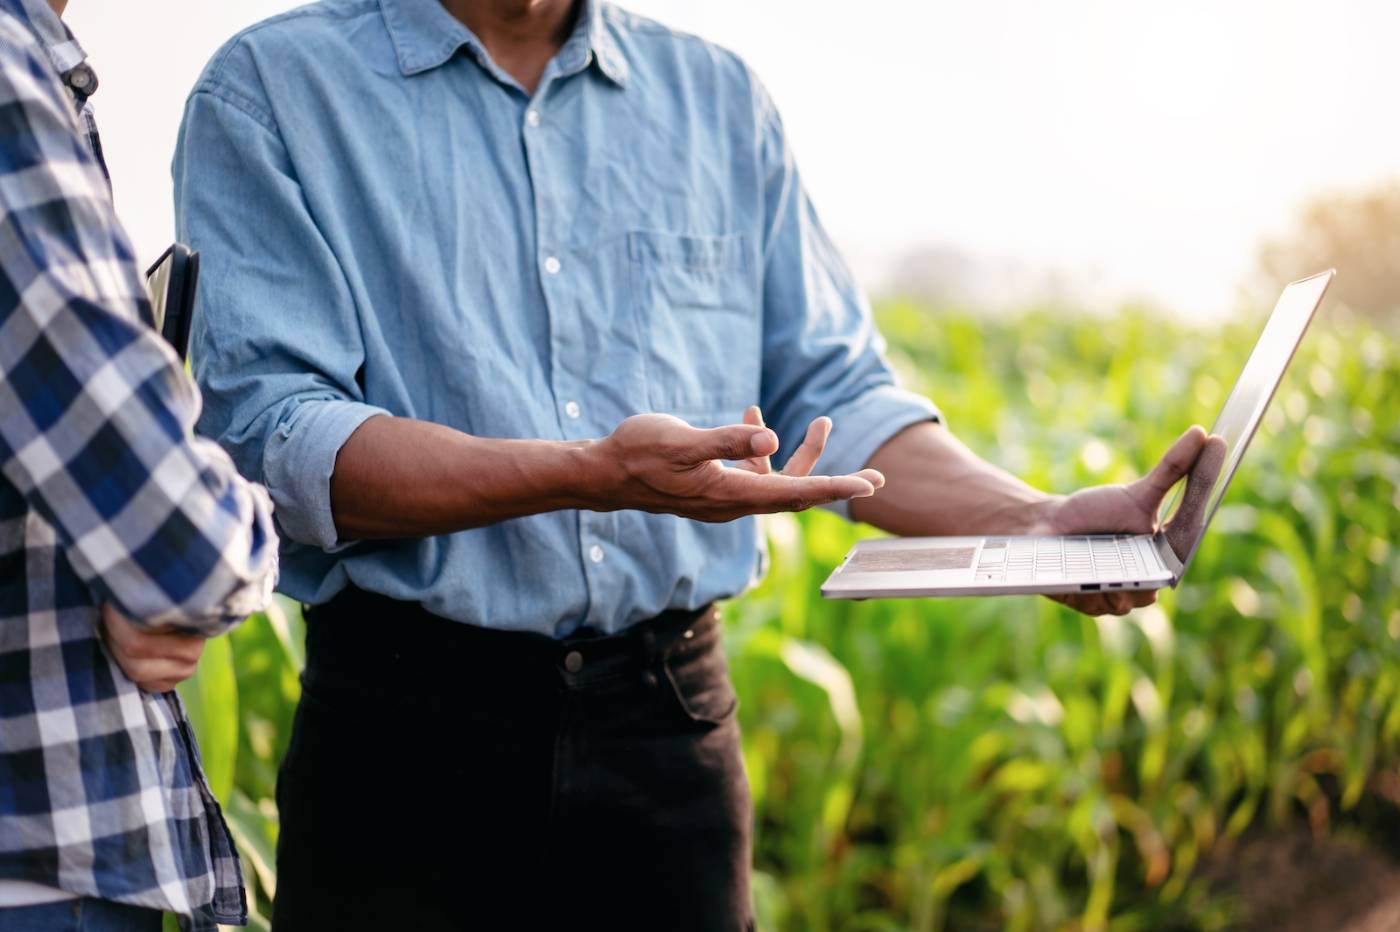 Two men looking at a laptop in front of a crop field